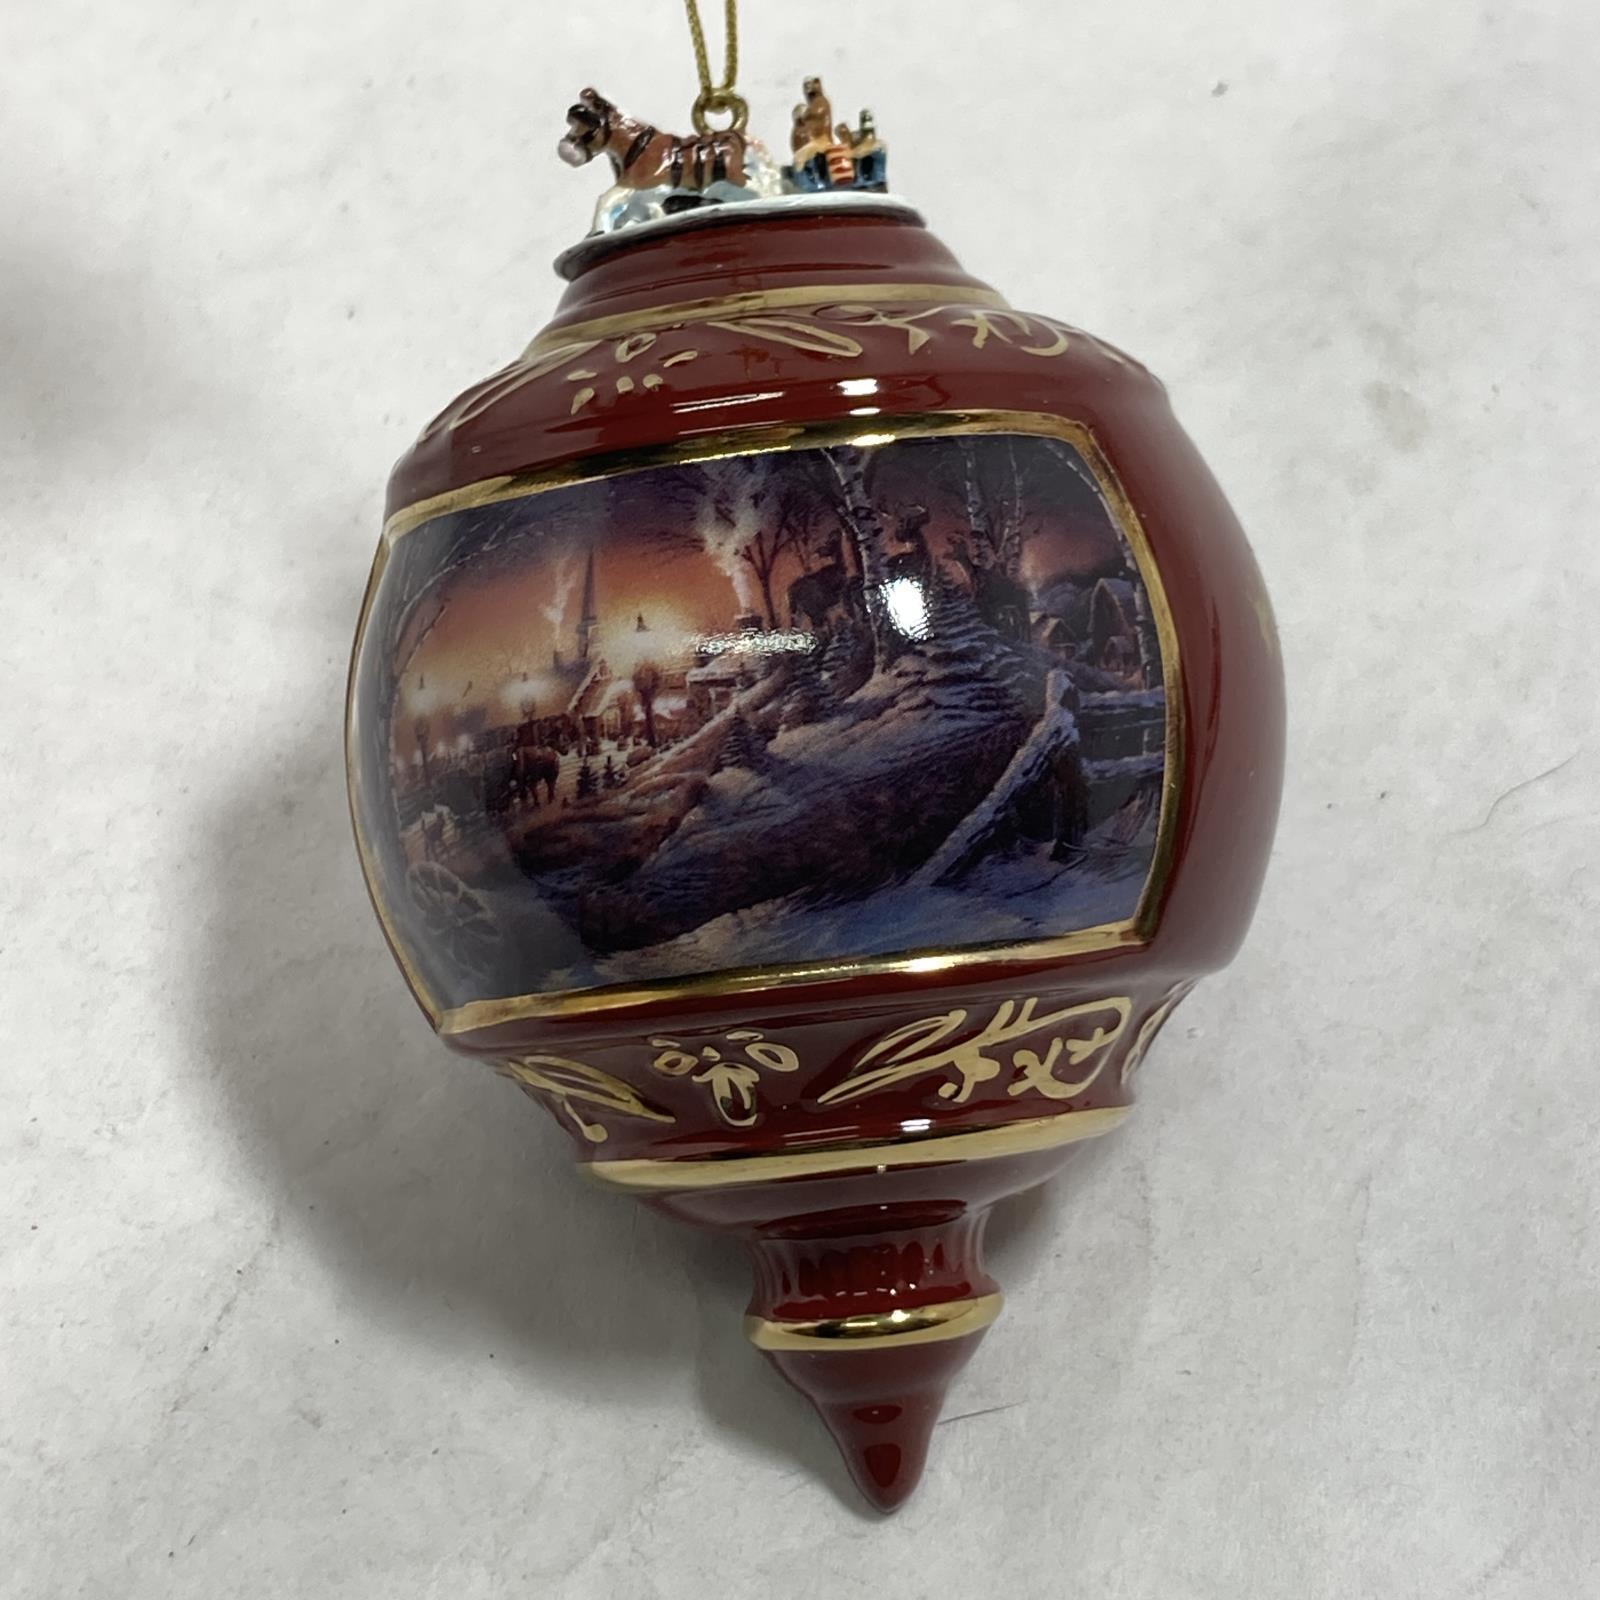 1999 Terry Redlin Night On the Town Porcelain Christmas Ornament Brown